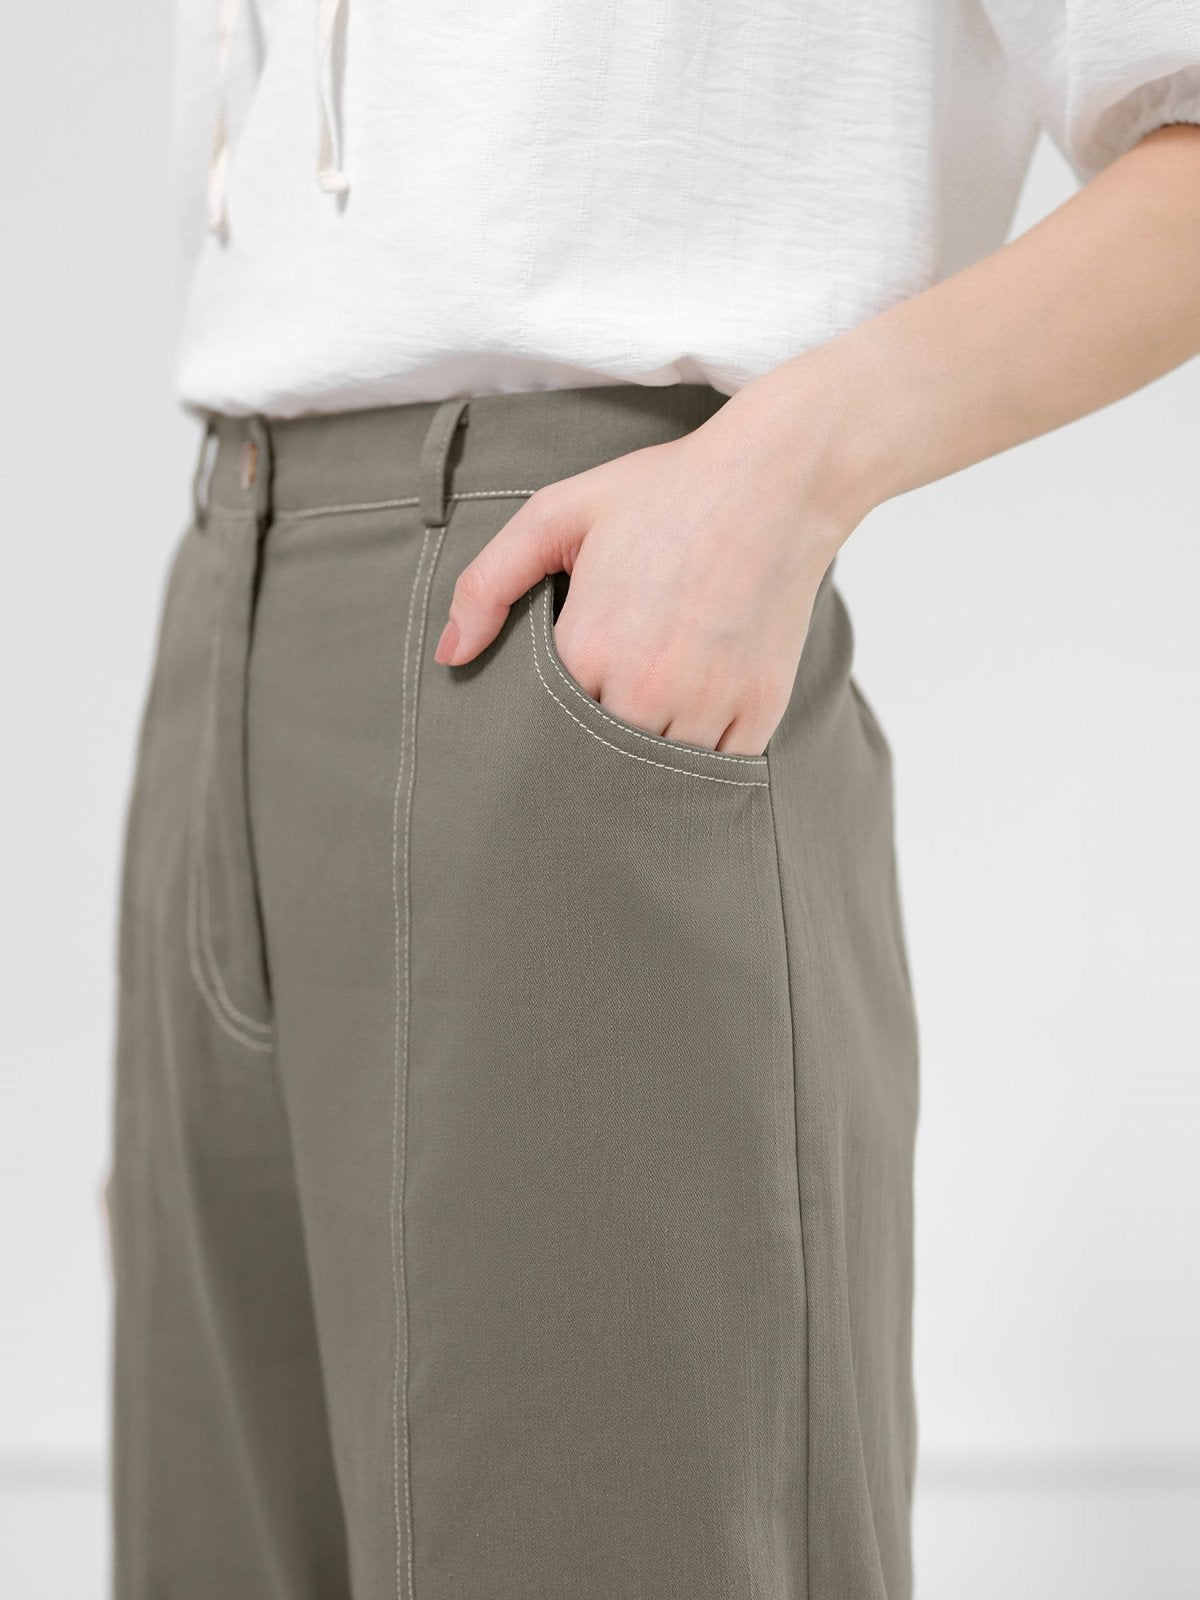 Marian Contrast Stitch Trousers - DAG-DD0721-23ForestS - Forest Green - S - D'ZAGE Designs